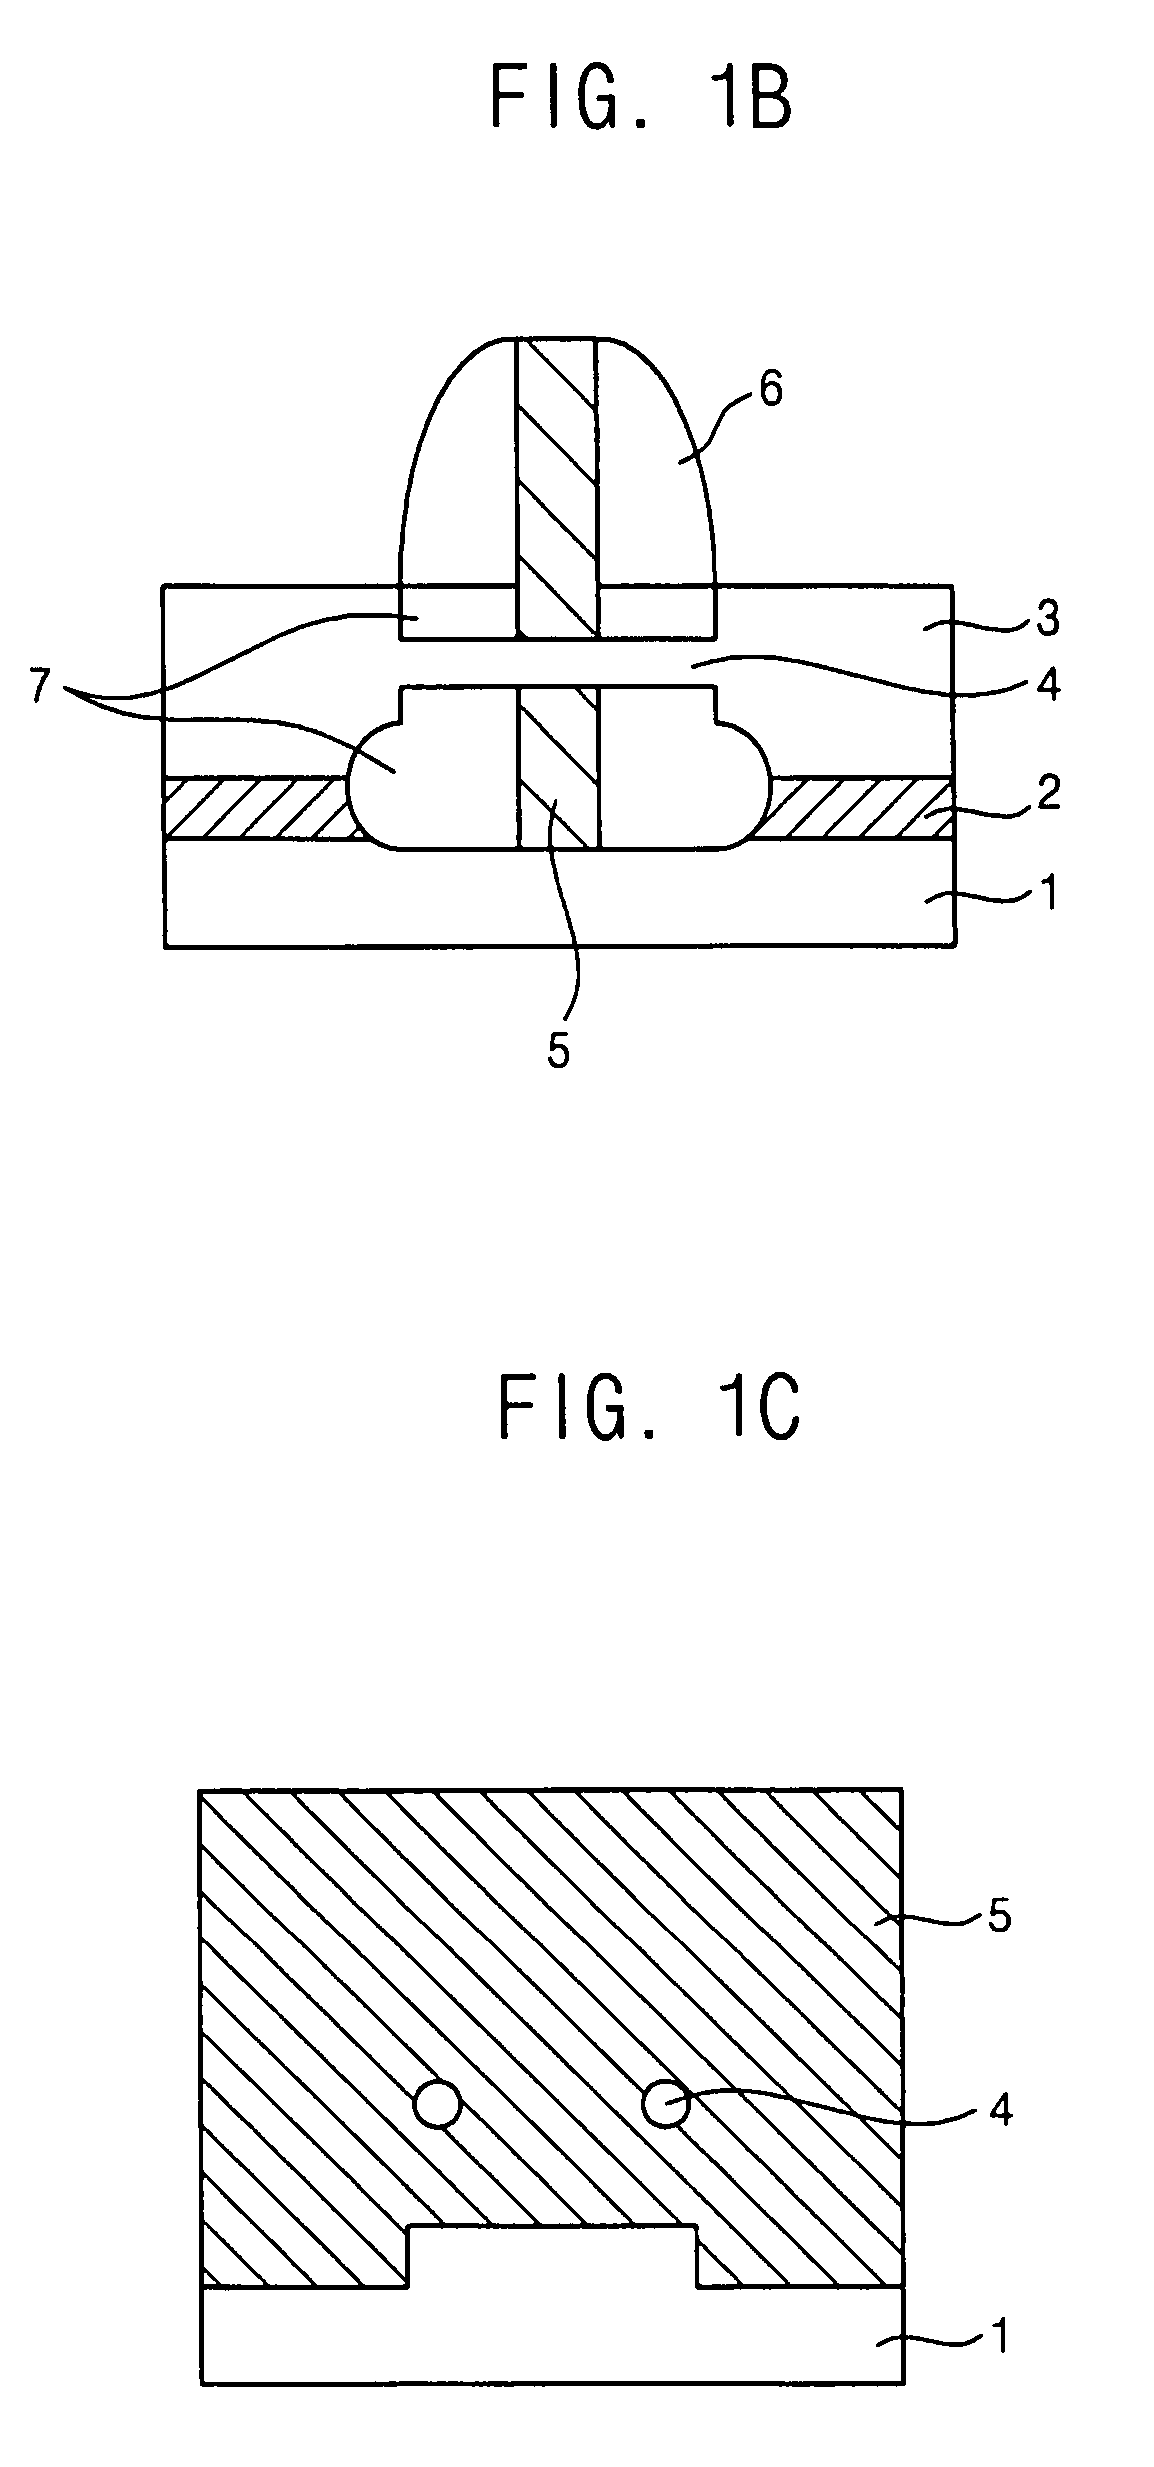 Gate-all-around type semiconductor device and method of manufacturing the same